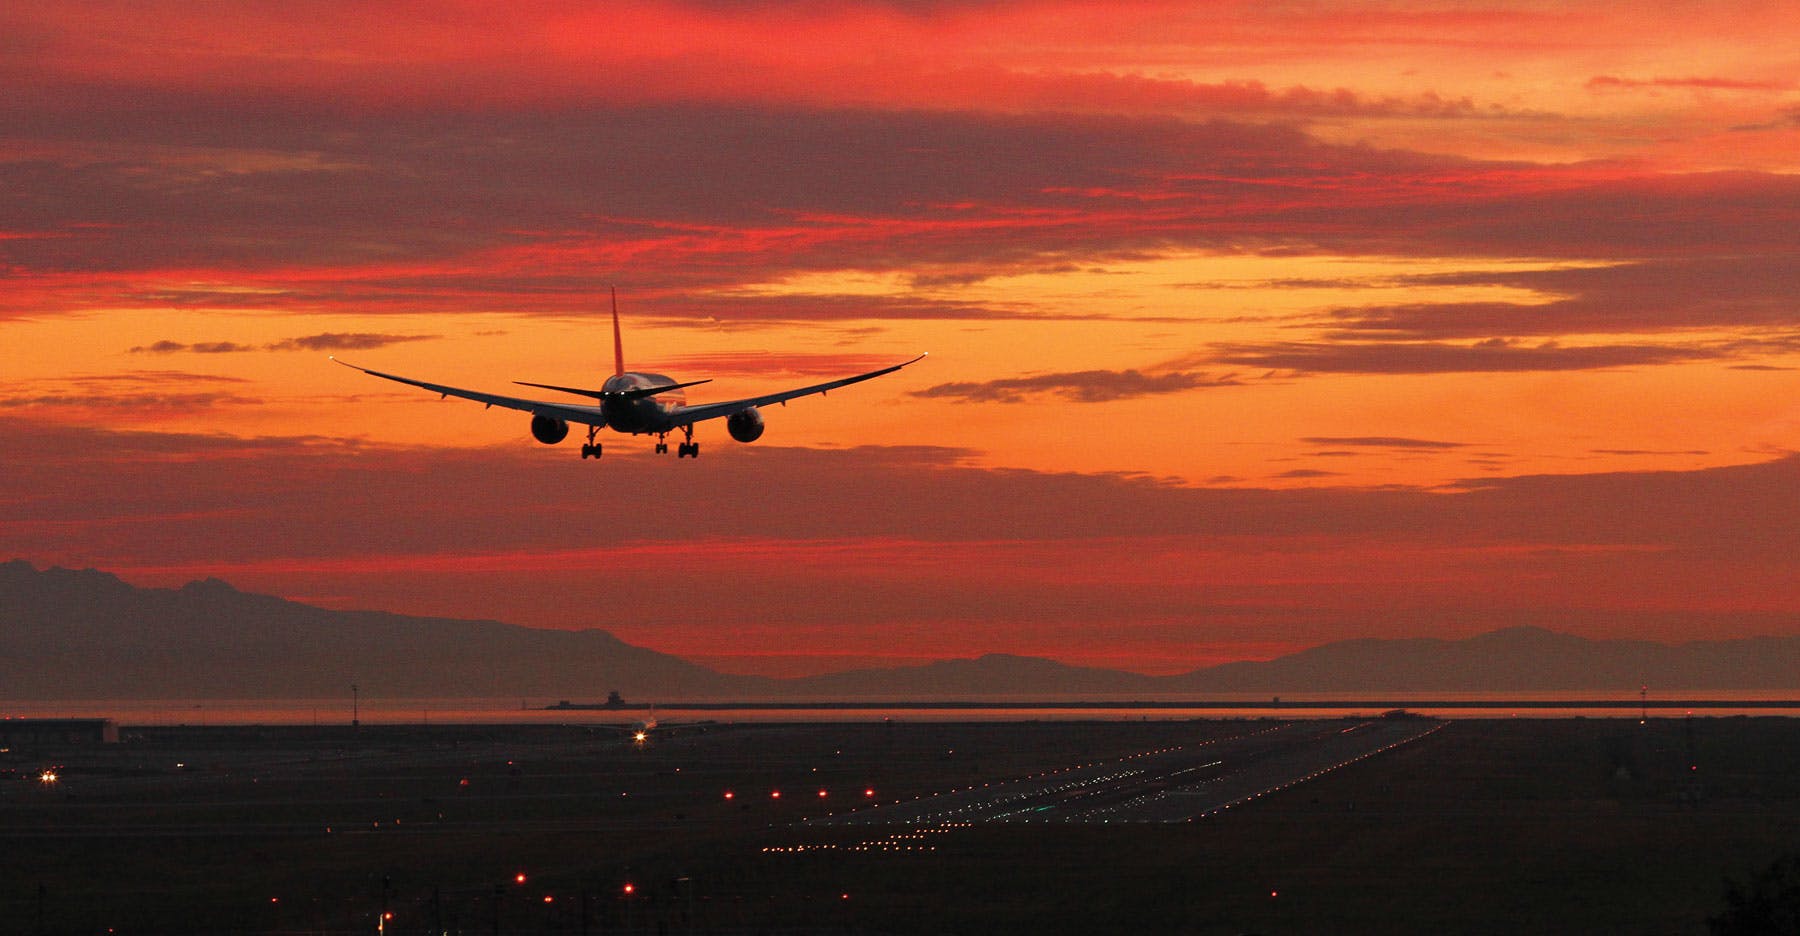 An airplane flying toward a deep orange sunset, preparing to land on a runway lit up with sparkling lights.